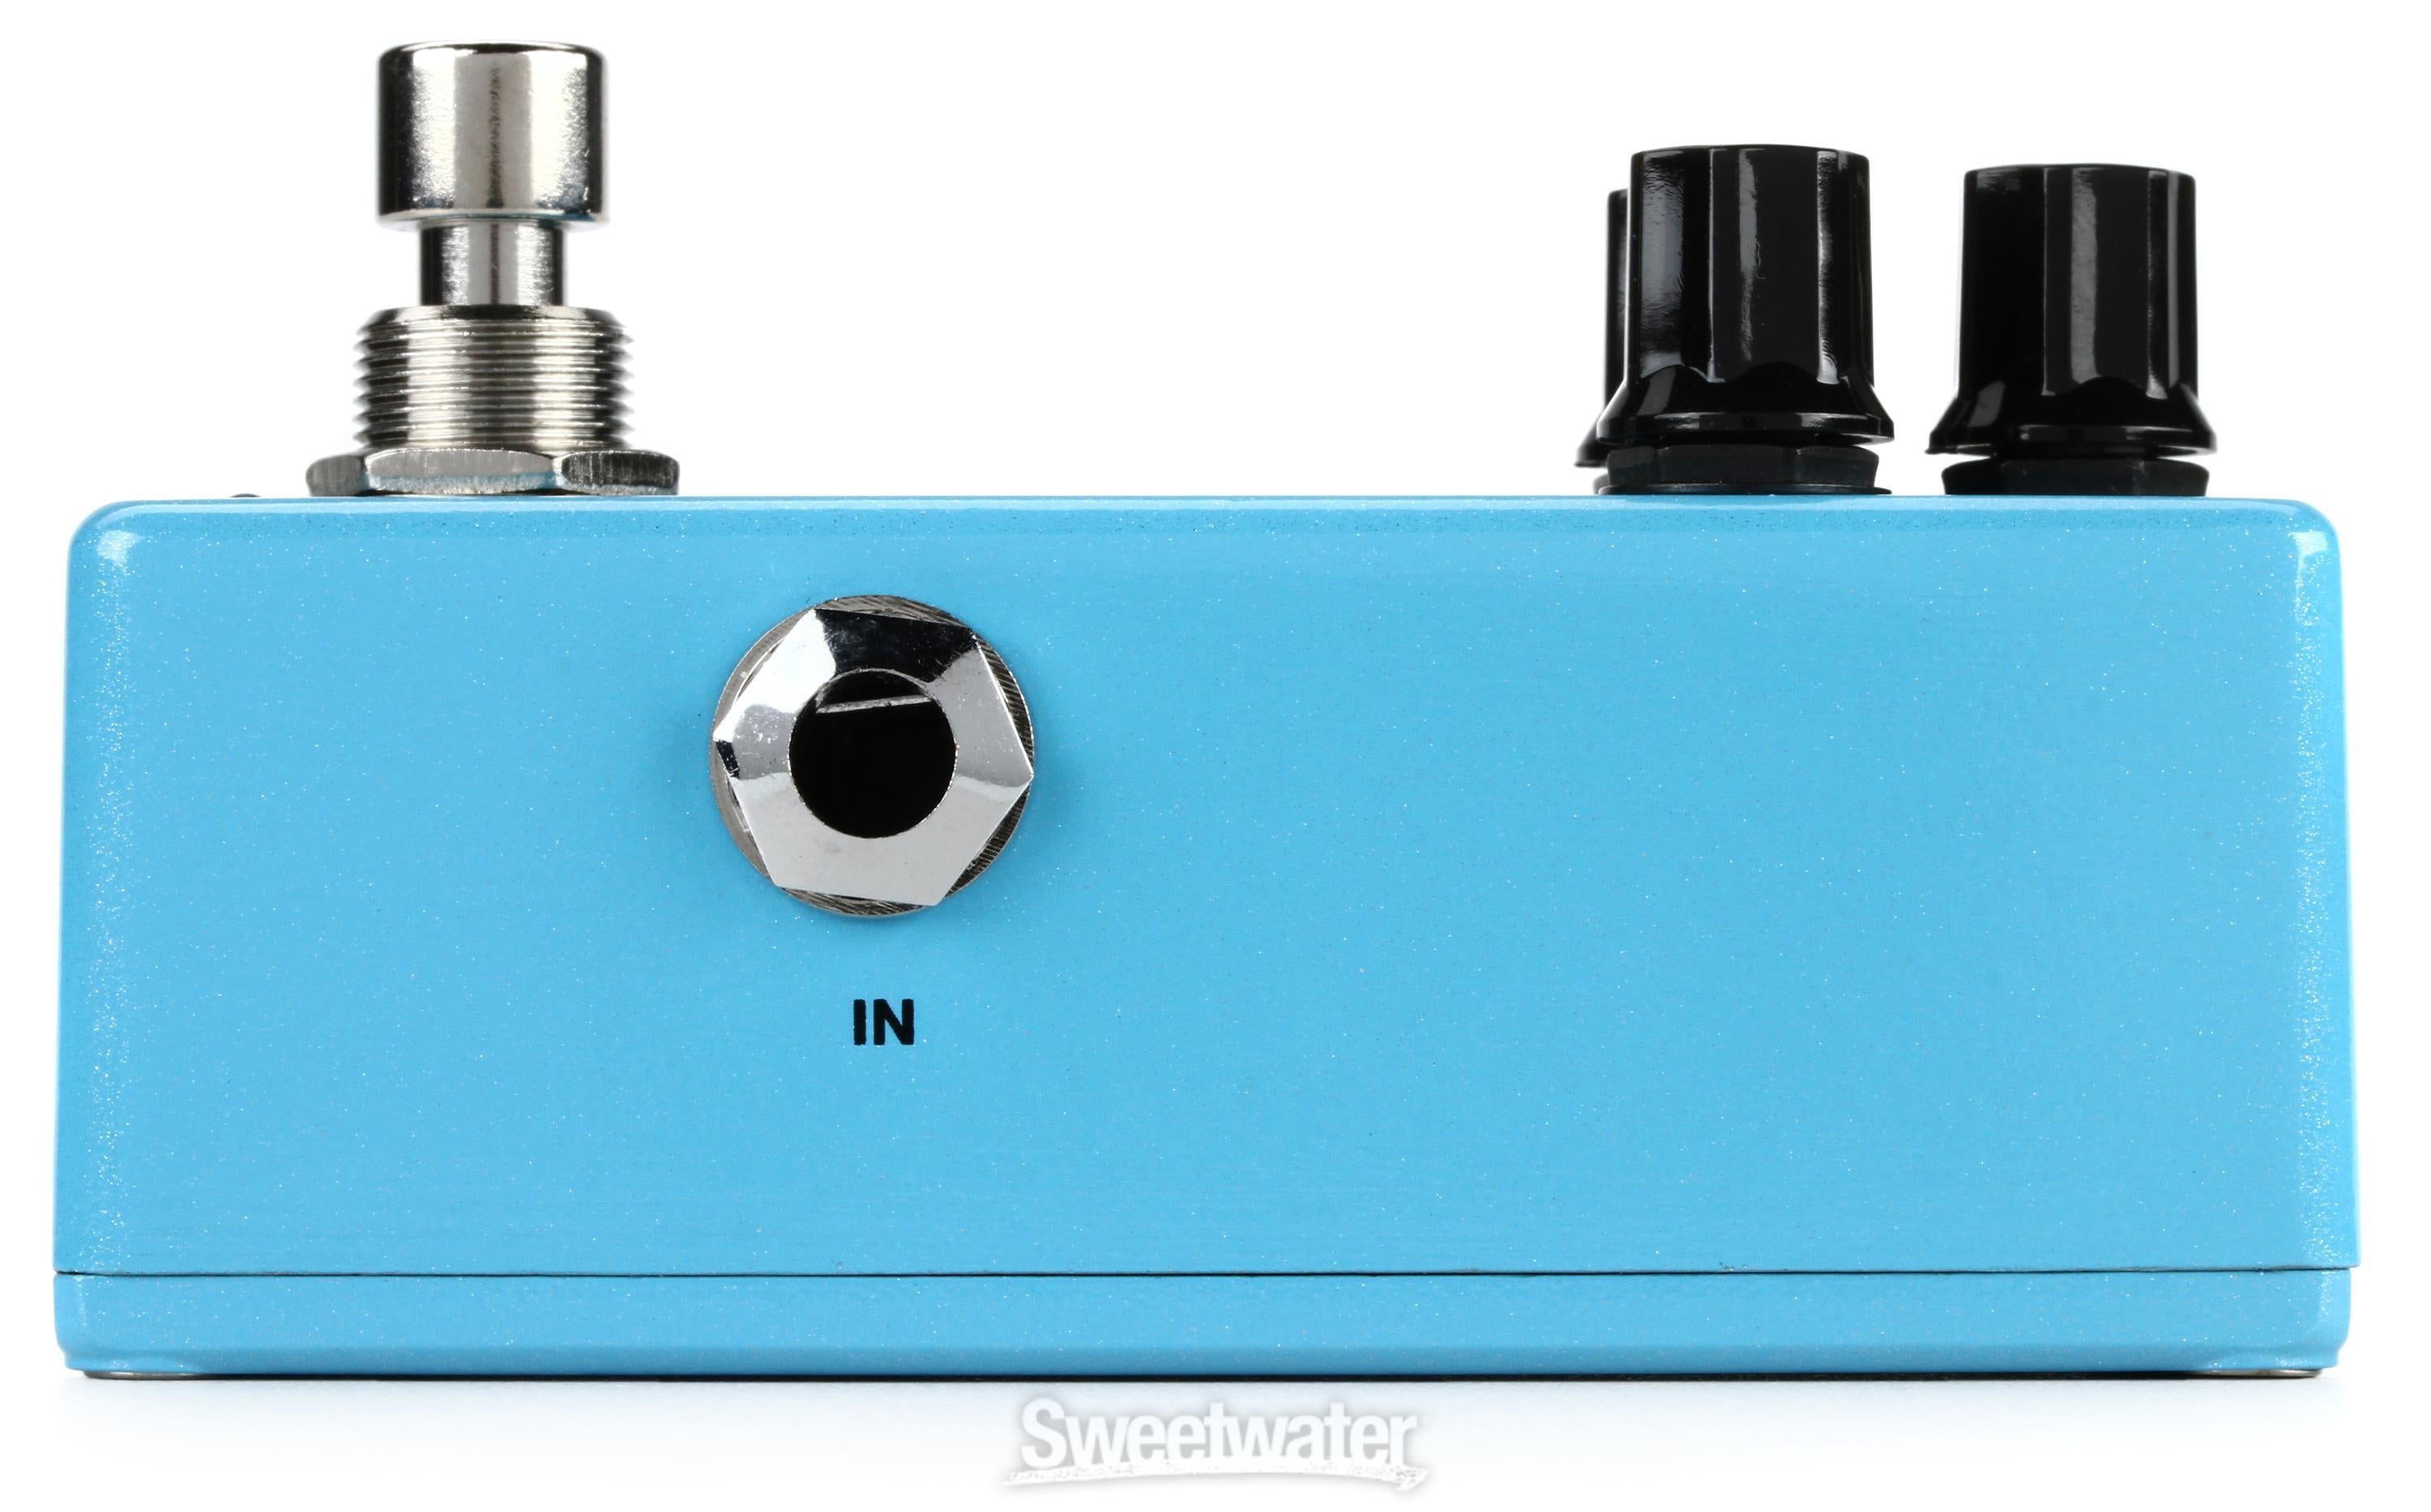 MXR M294 Sugar Drive Overdrive Pedal | Sweetwater